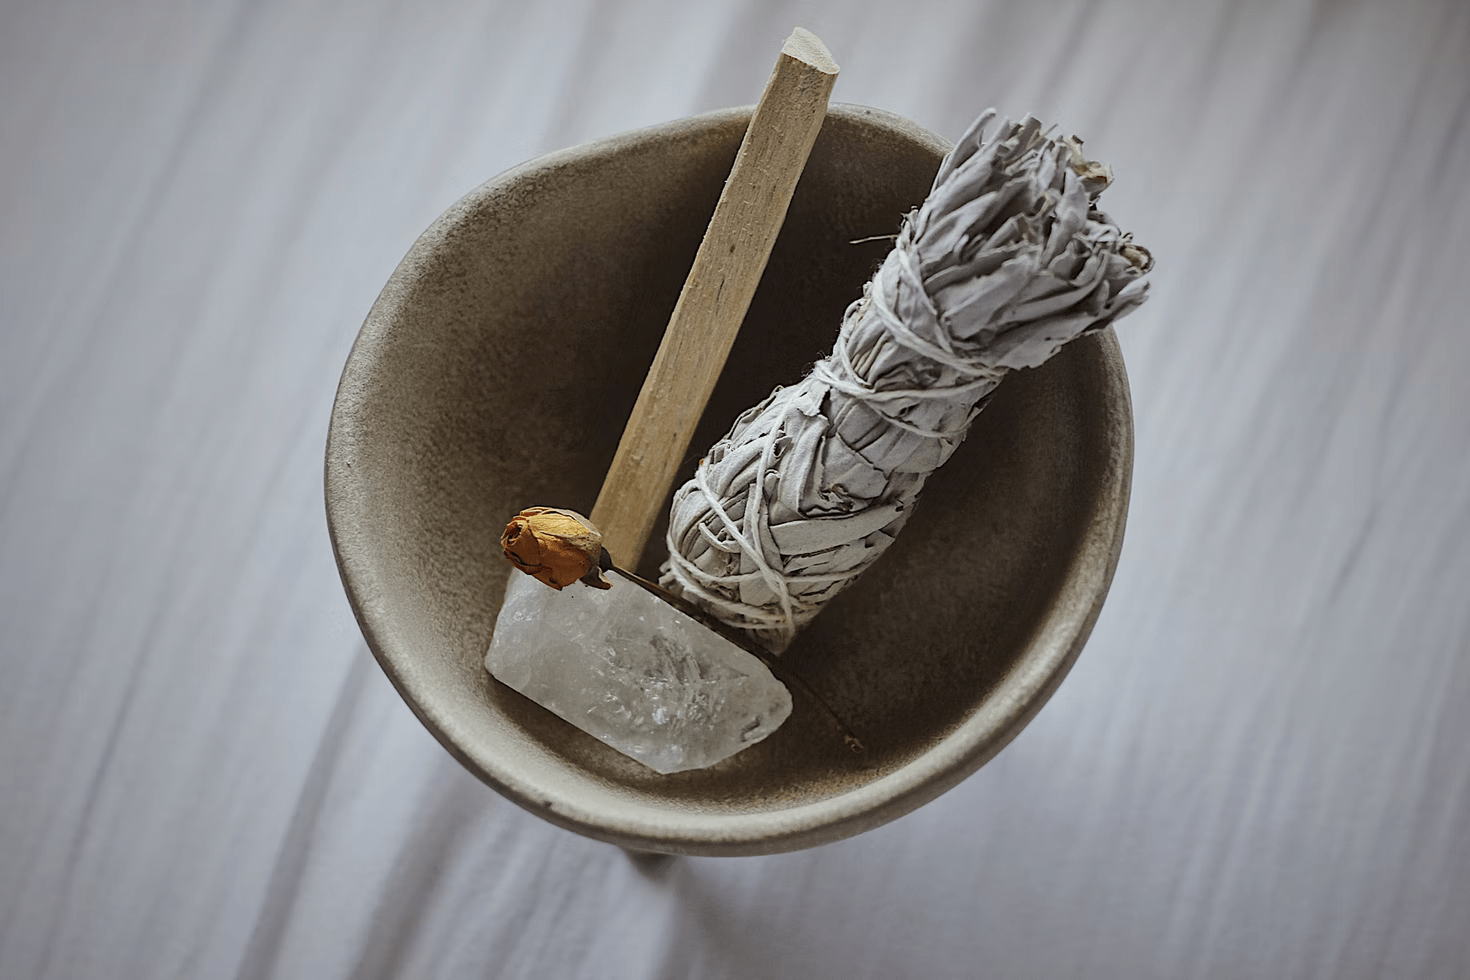 incense and a little rose in a wooden bowl